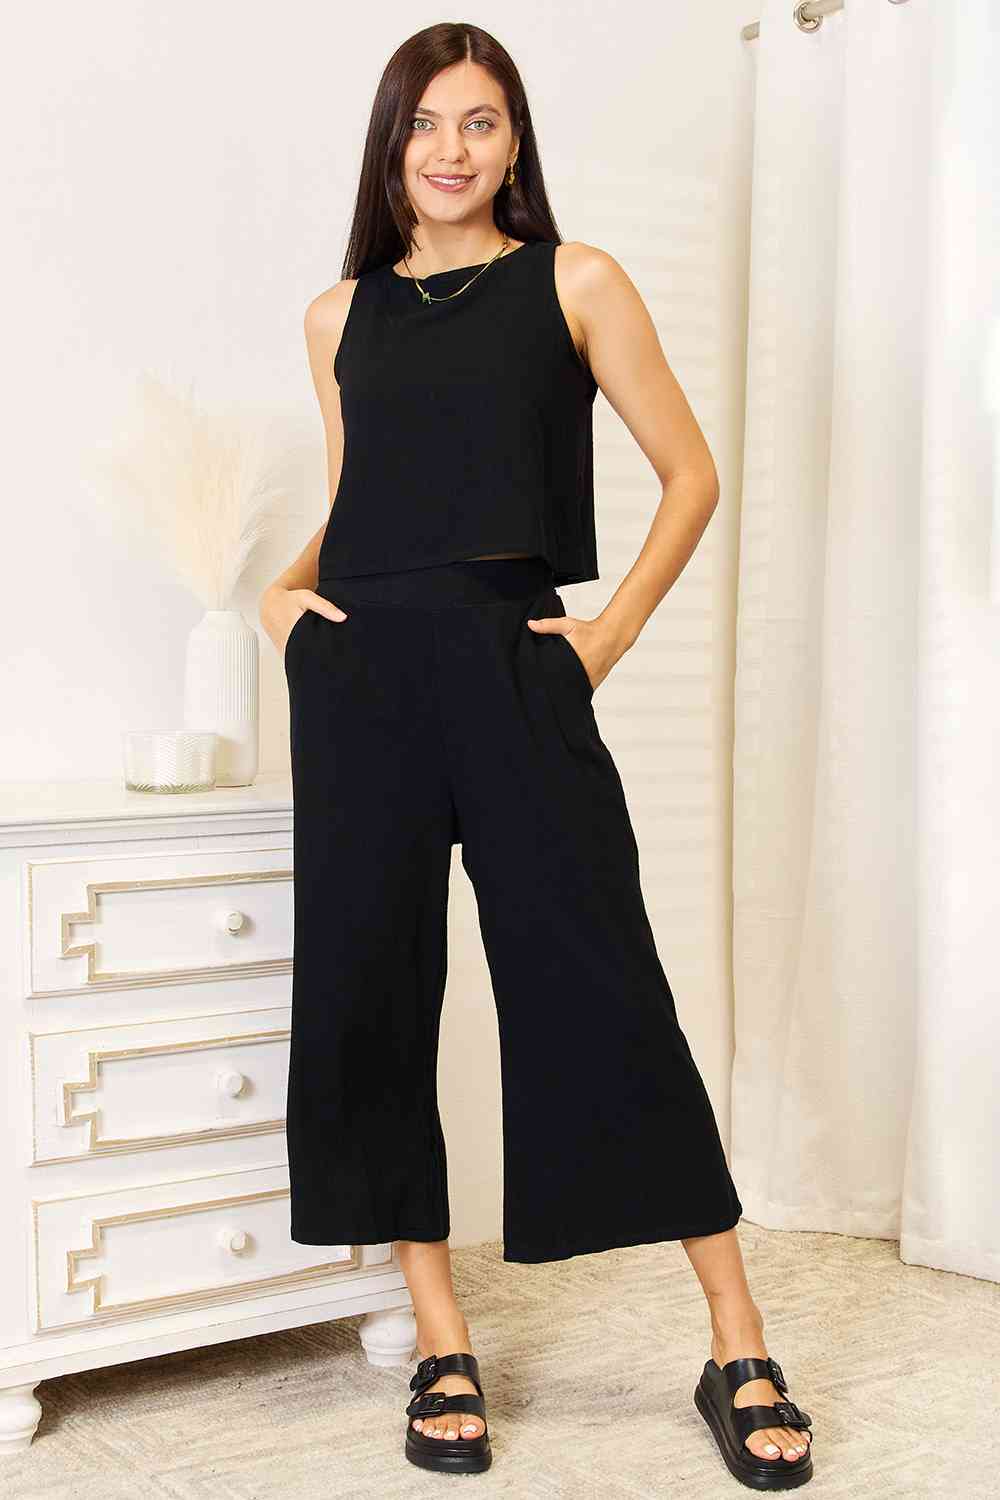 Double Take Buttoned Round Neck Tank and Wide Leg Pants Set - Selden & Kingsley